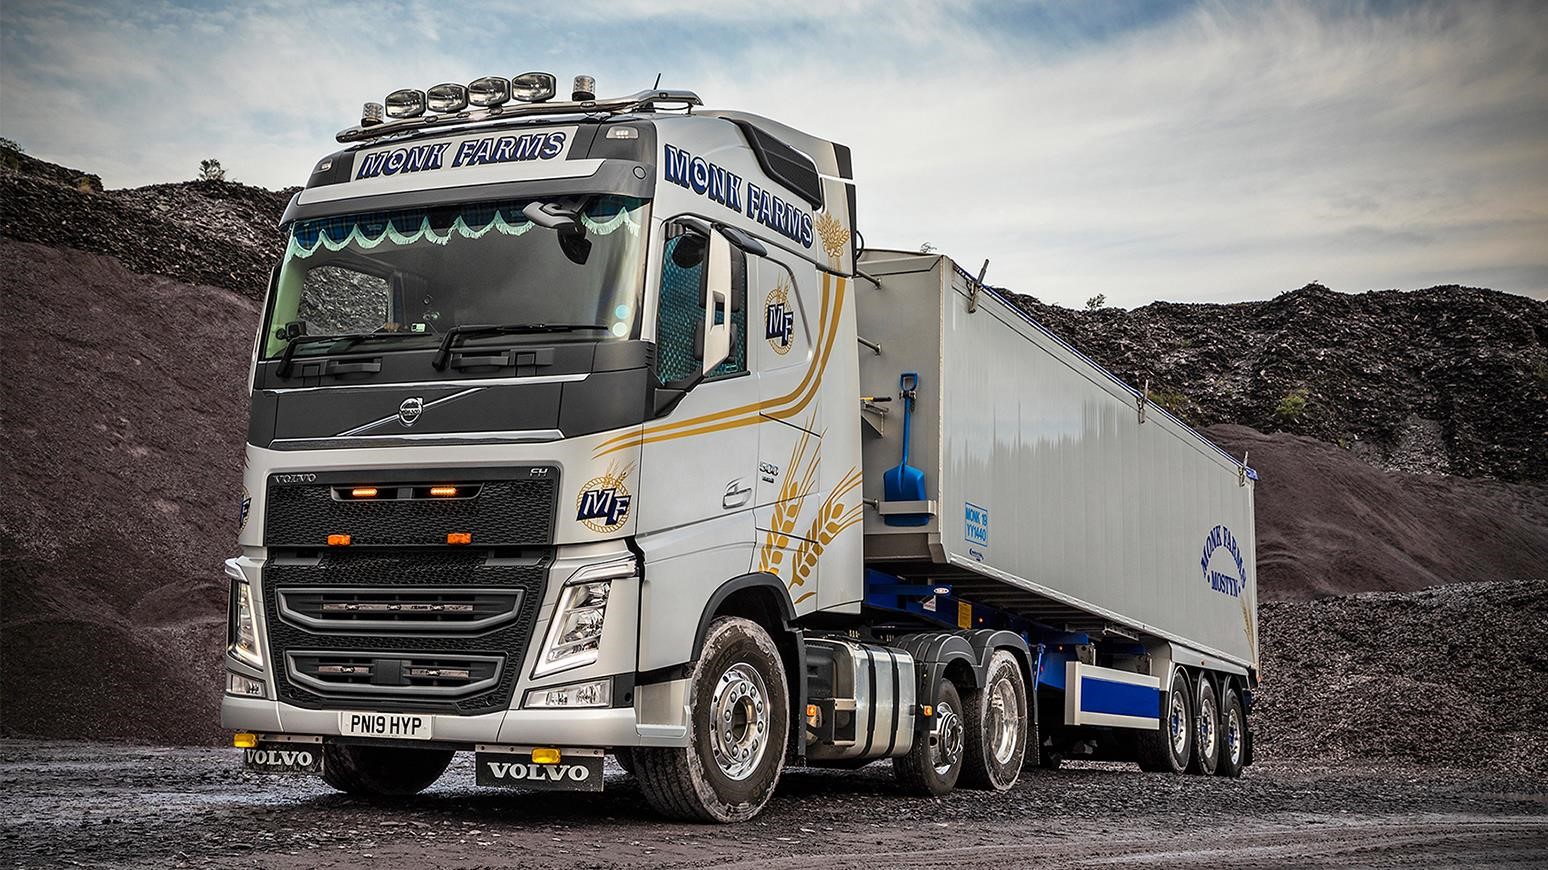 Monk Transport Of North Wales Purchases Three New Volvo FH-500 Tractor Units For Its Bulk Haulage Operations